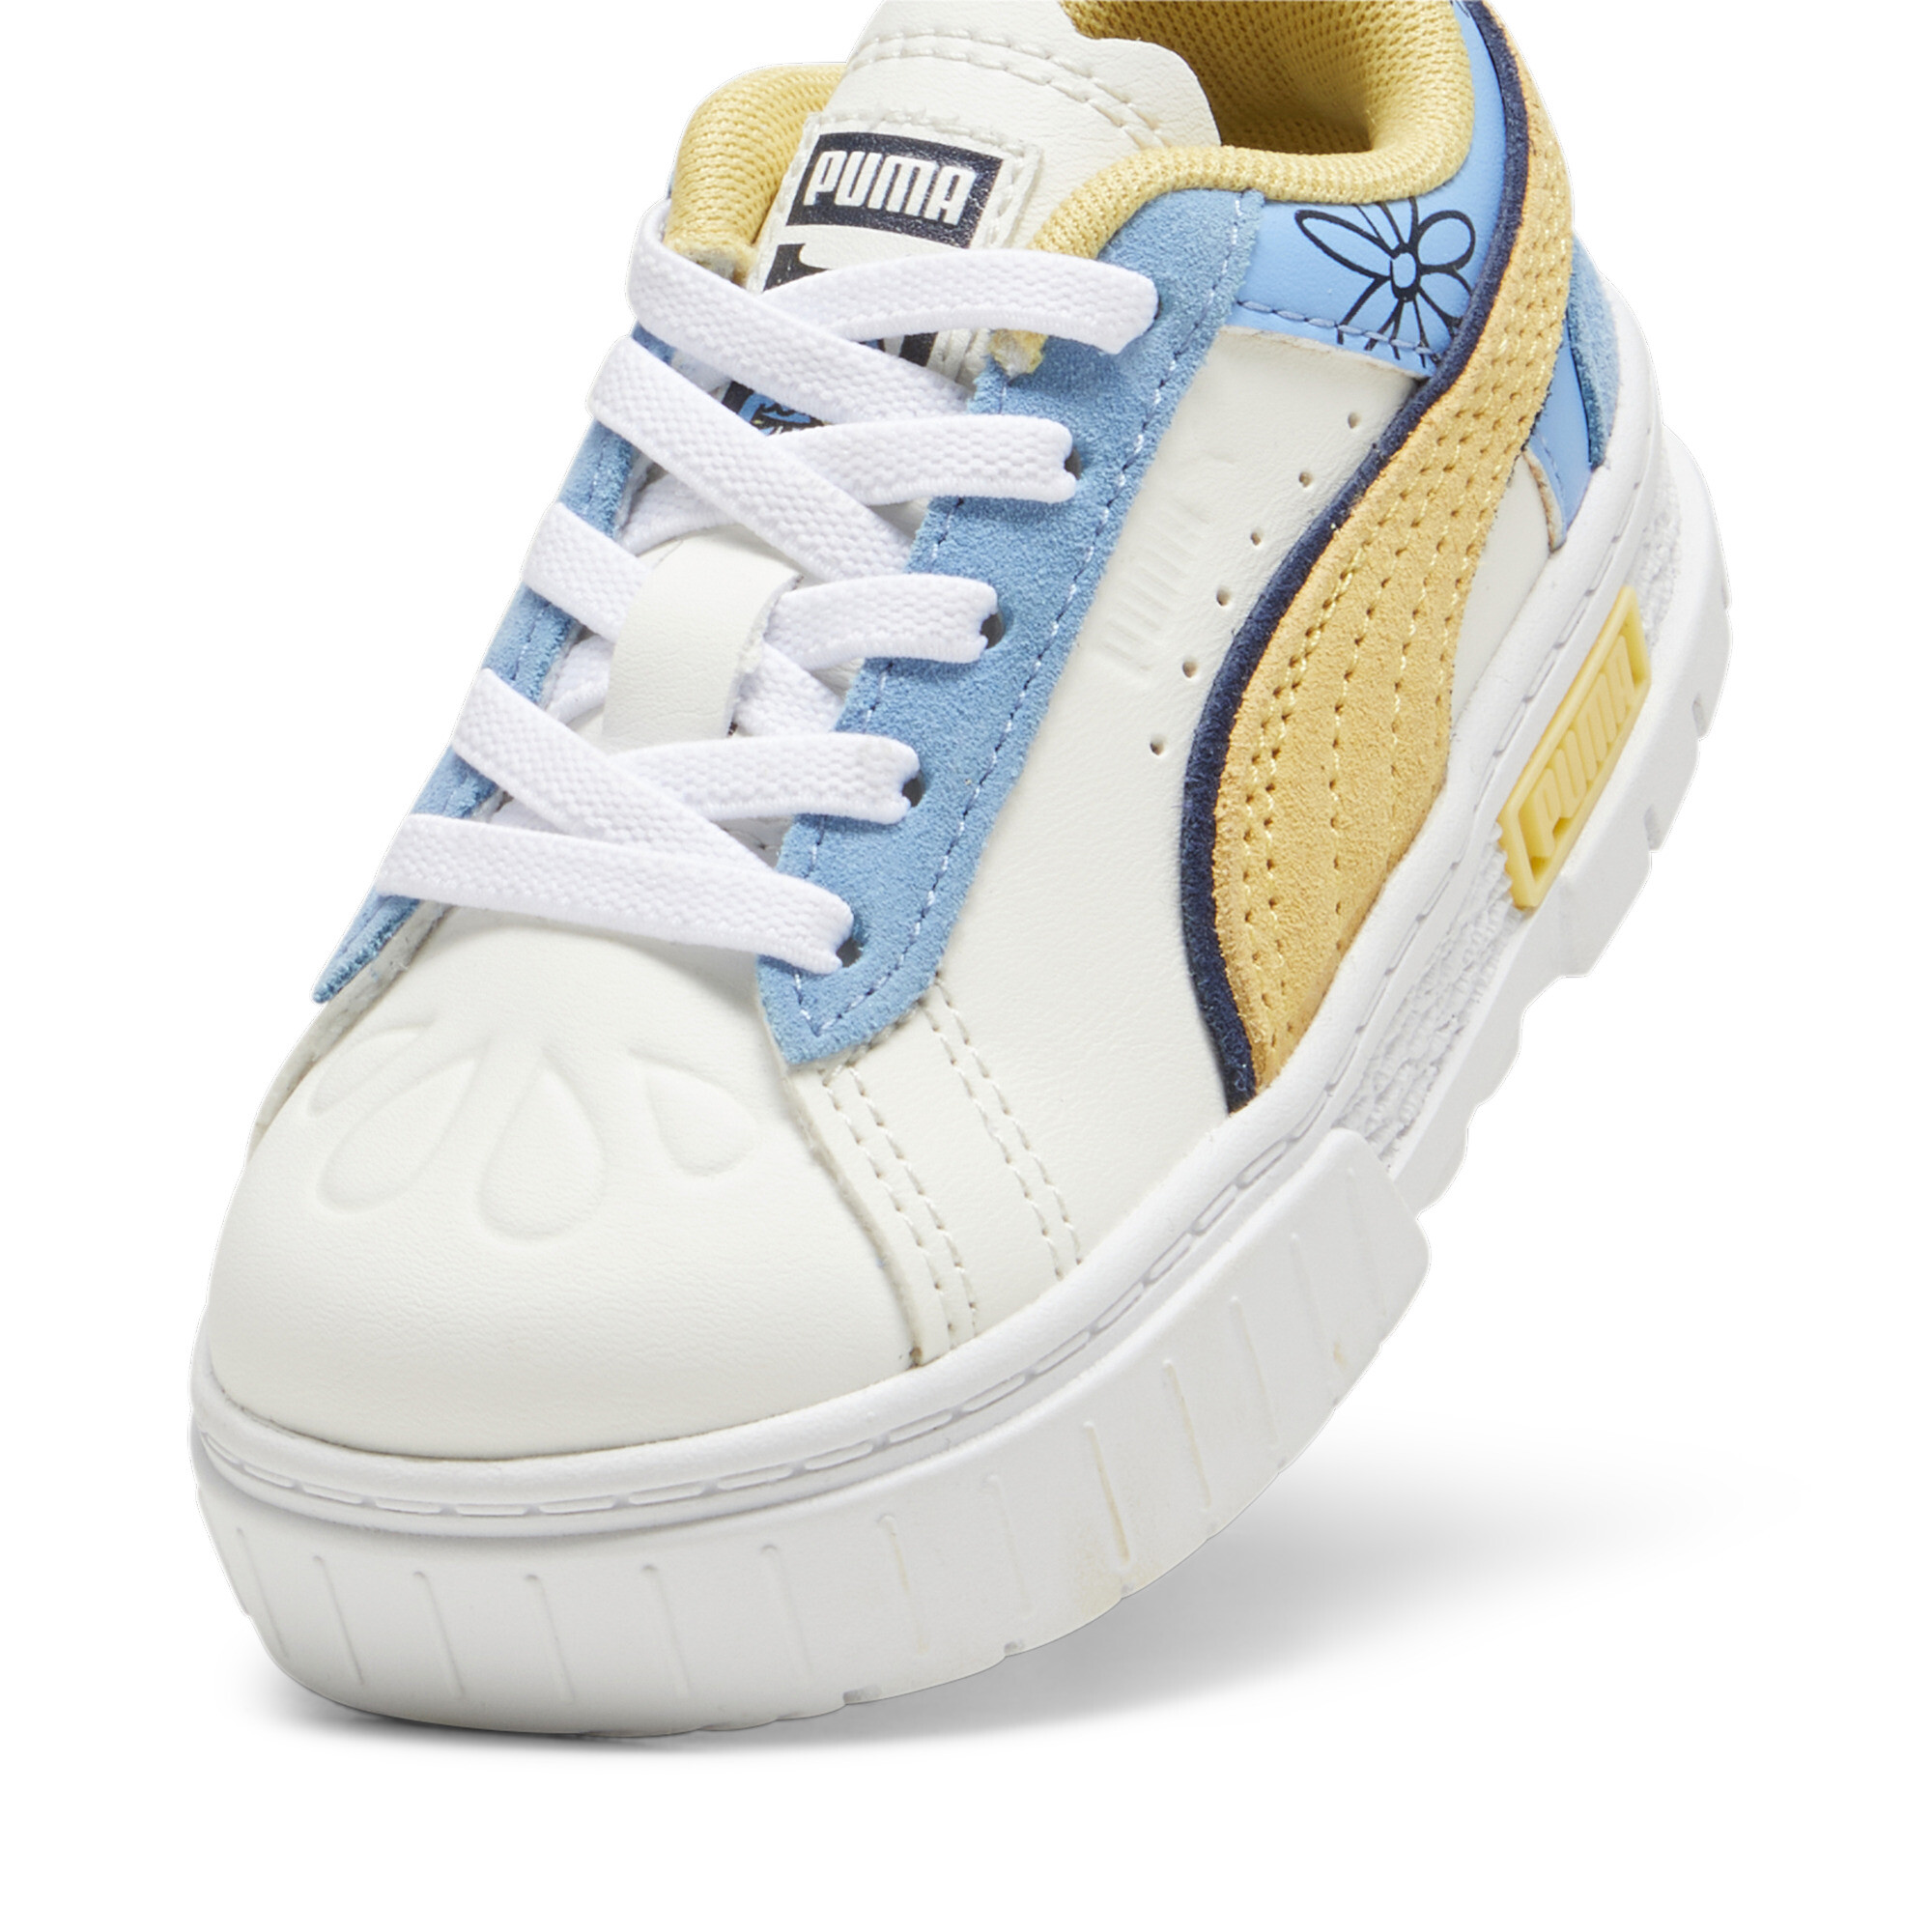 Women's Puma X THE SMURFS Mayze Toddlers' Sneakers, White, Size 19, Shoes